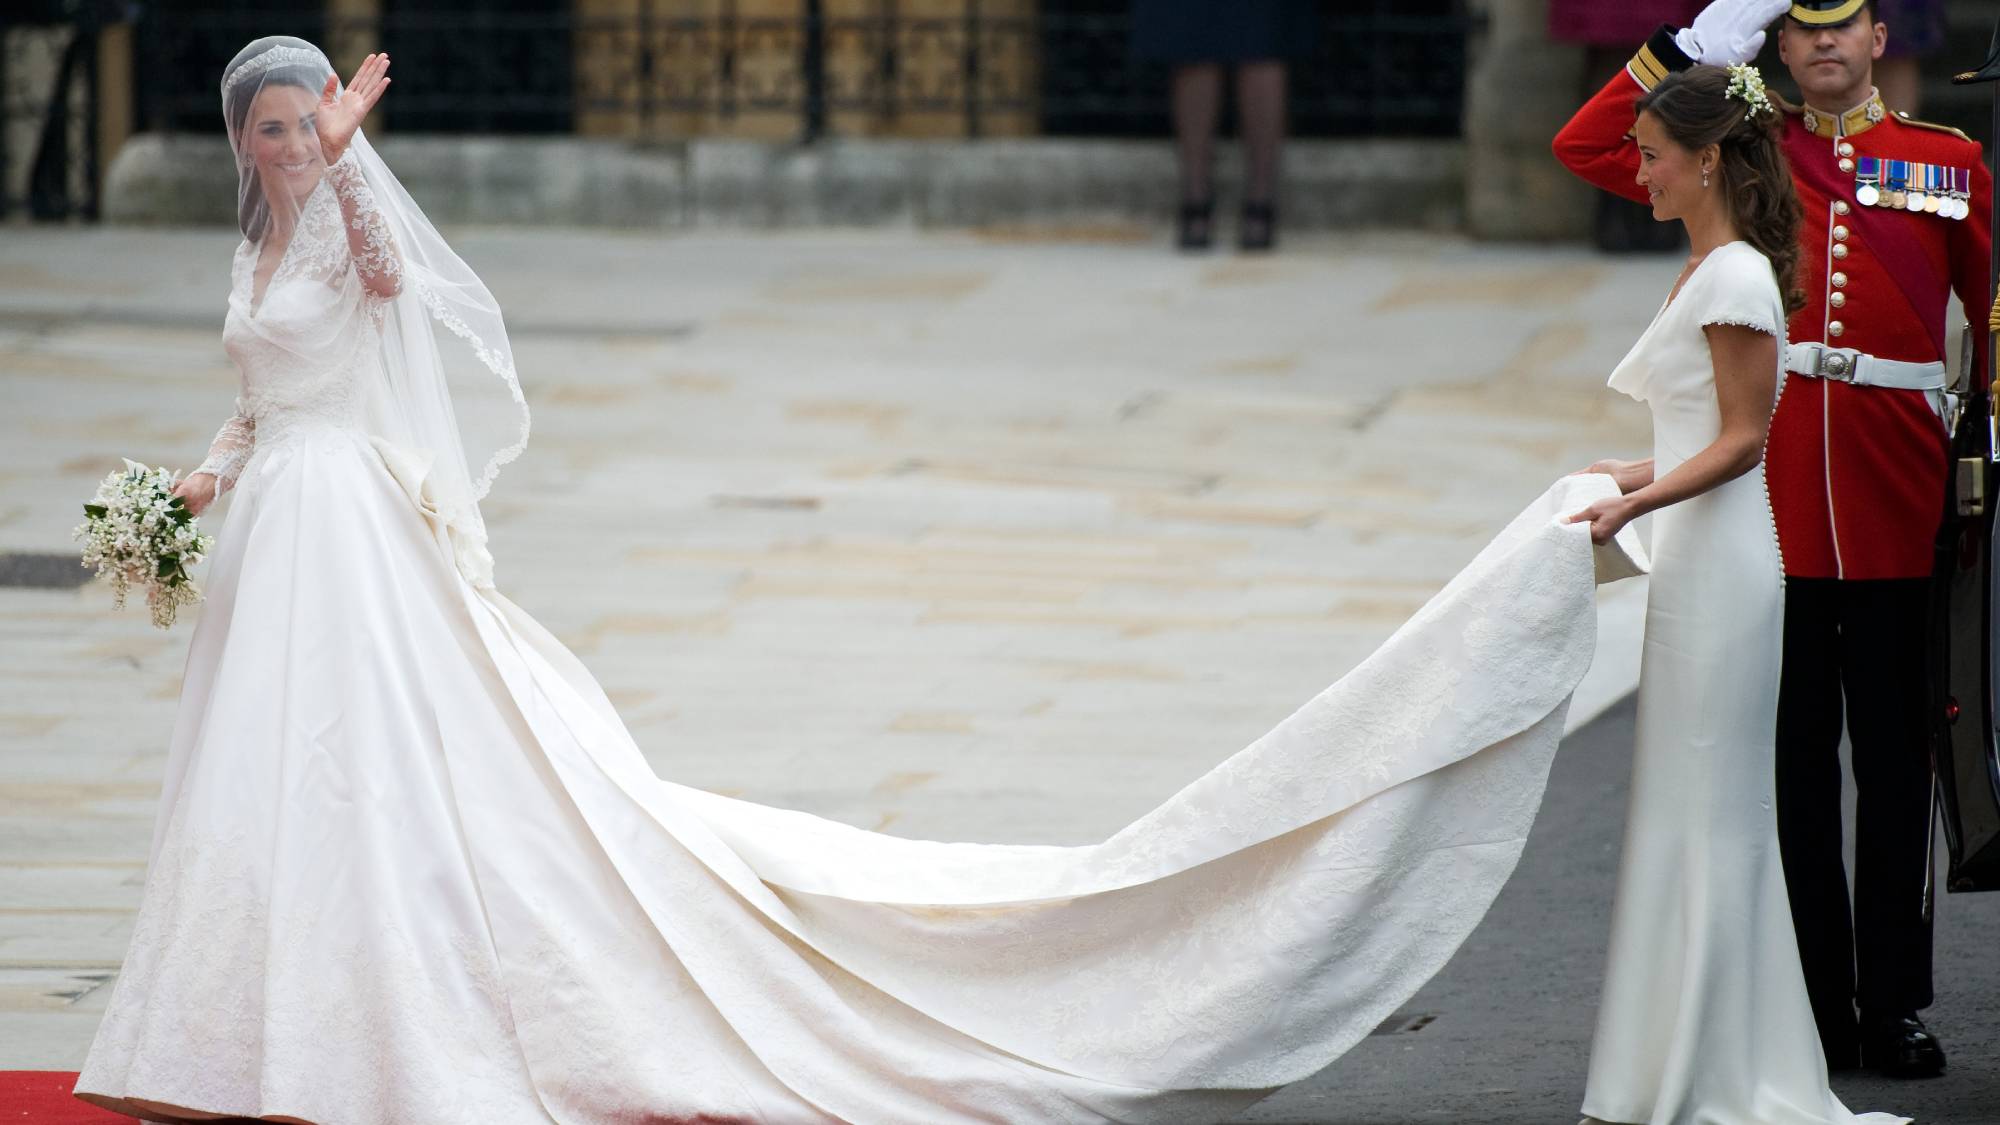 Kate Middleton's wedding dress stunning | Marie Claire